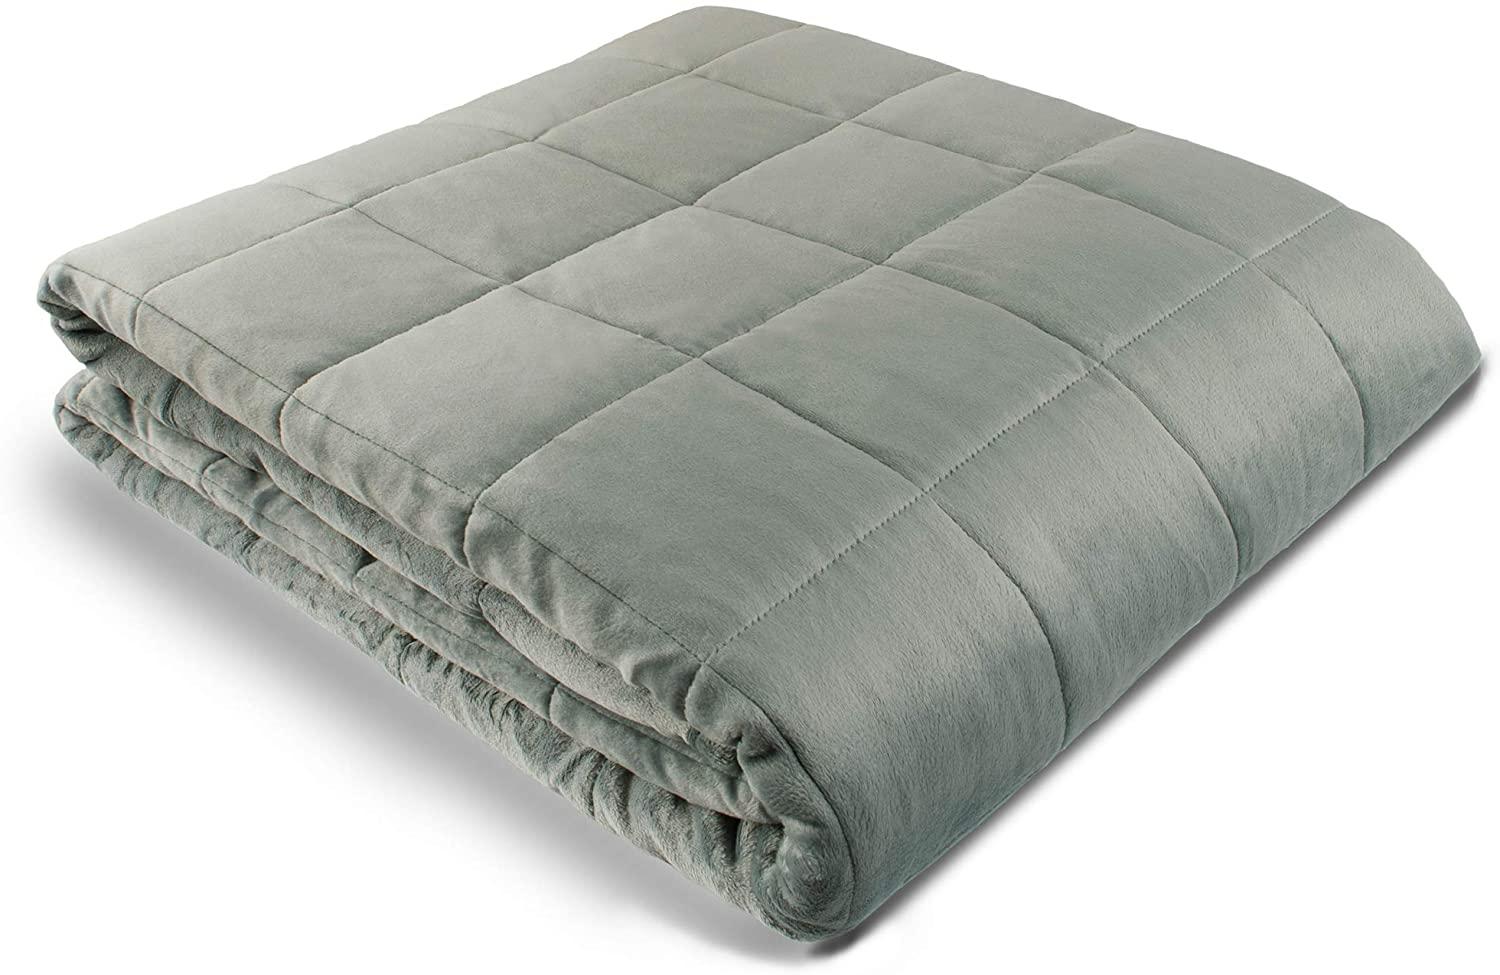 48x72 Weighted Blanket for $36.99 Shipped